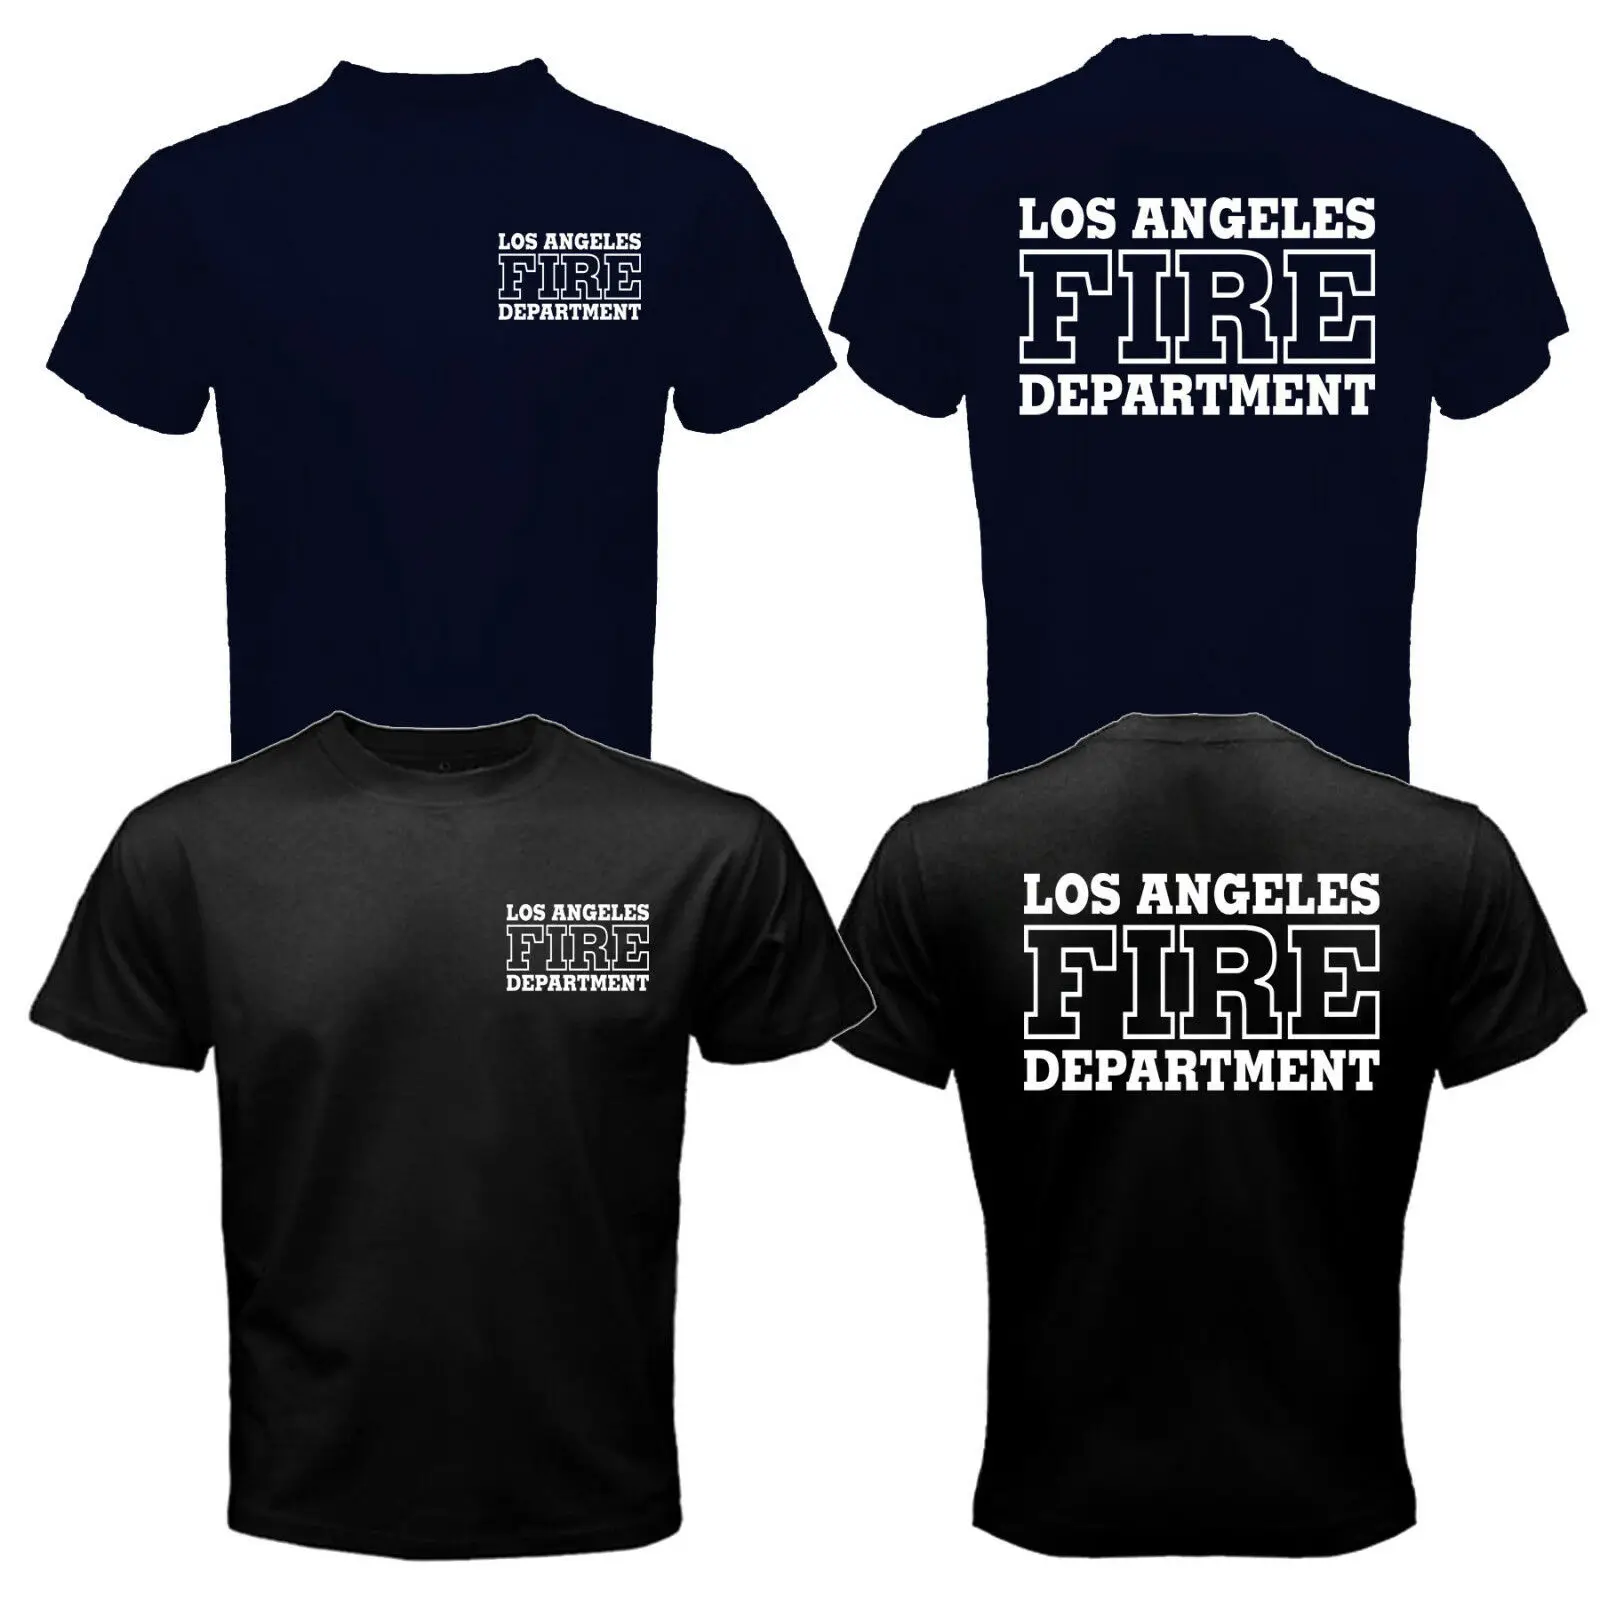 

2019 Fashion New Lafd Los Angeles Fire Department Search And Rescue San Andreas Movie T-Shirt Double Side Tees